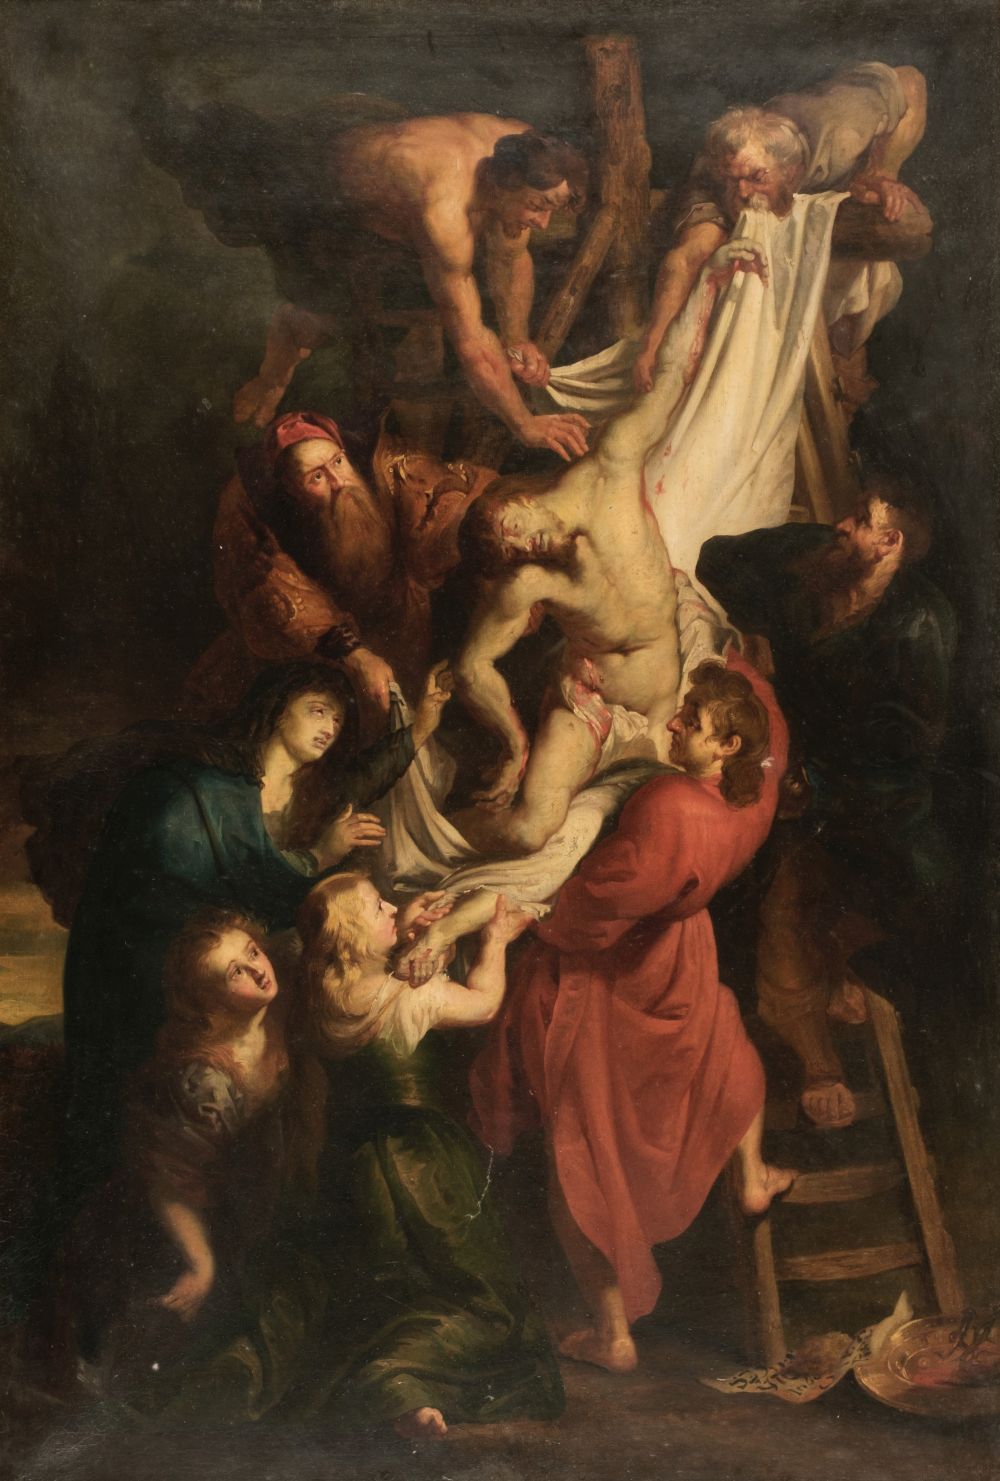 After Peter Paul Rubens (1577-1640). The Descent from the Cross, after 1614, oil on canvas - Image 2 of 8